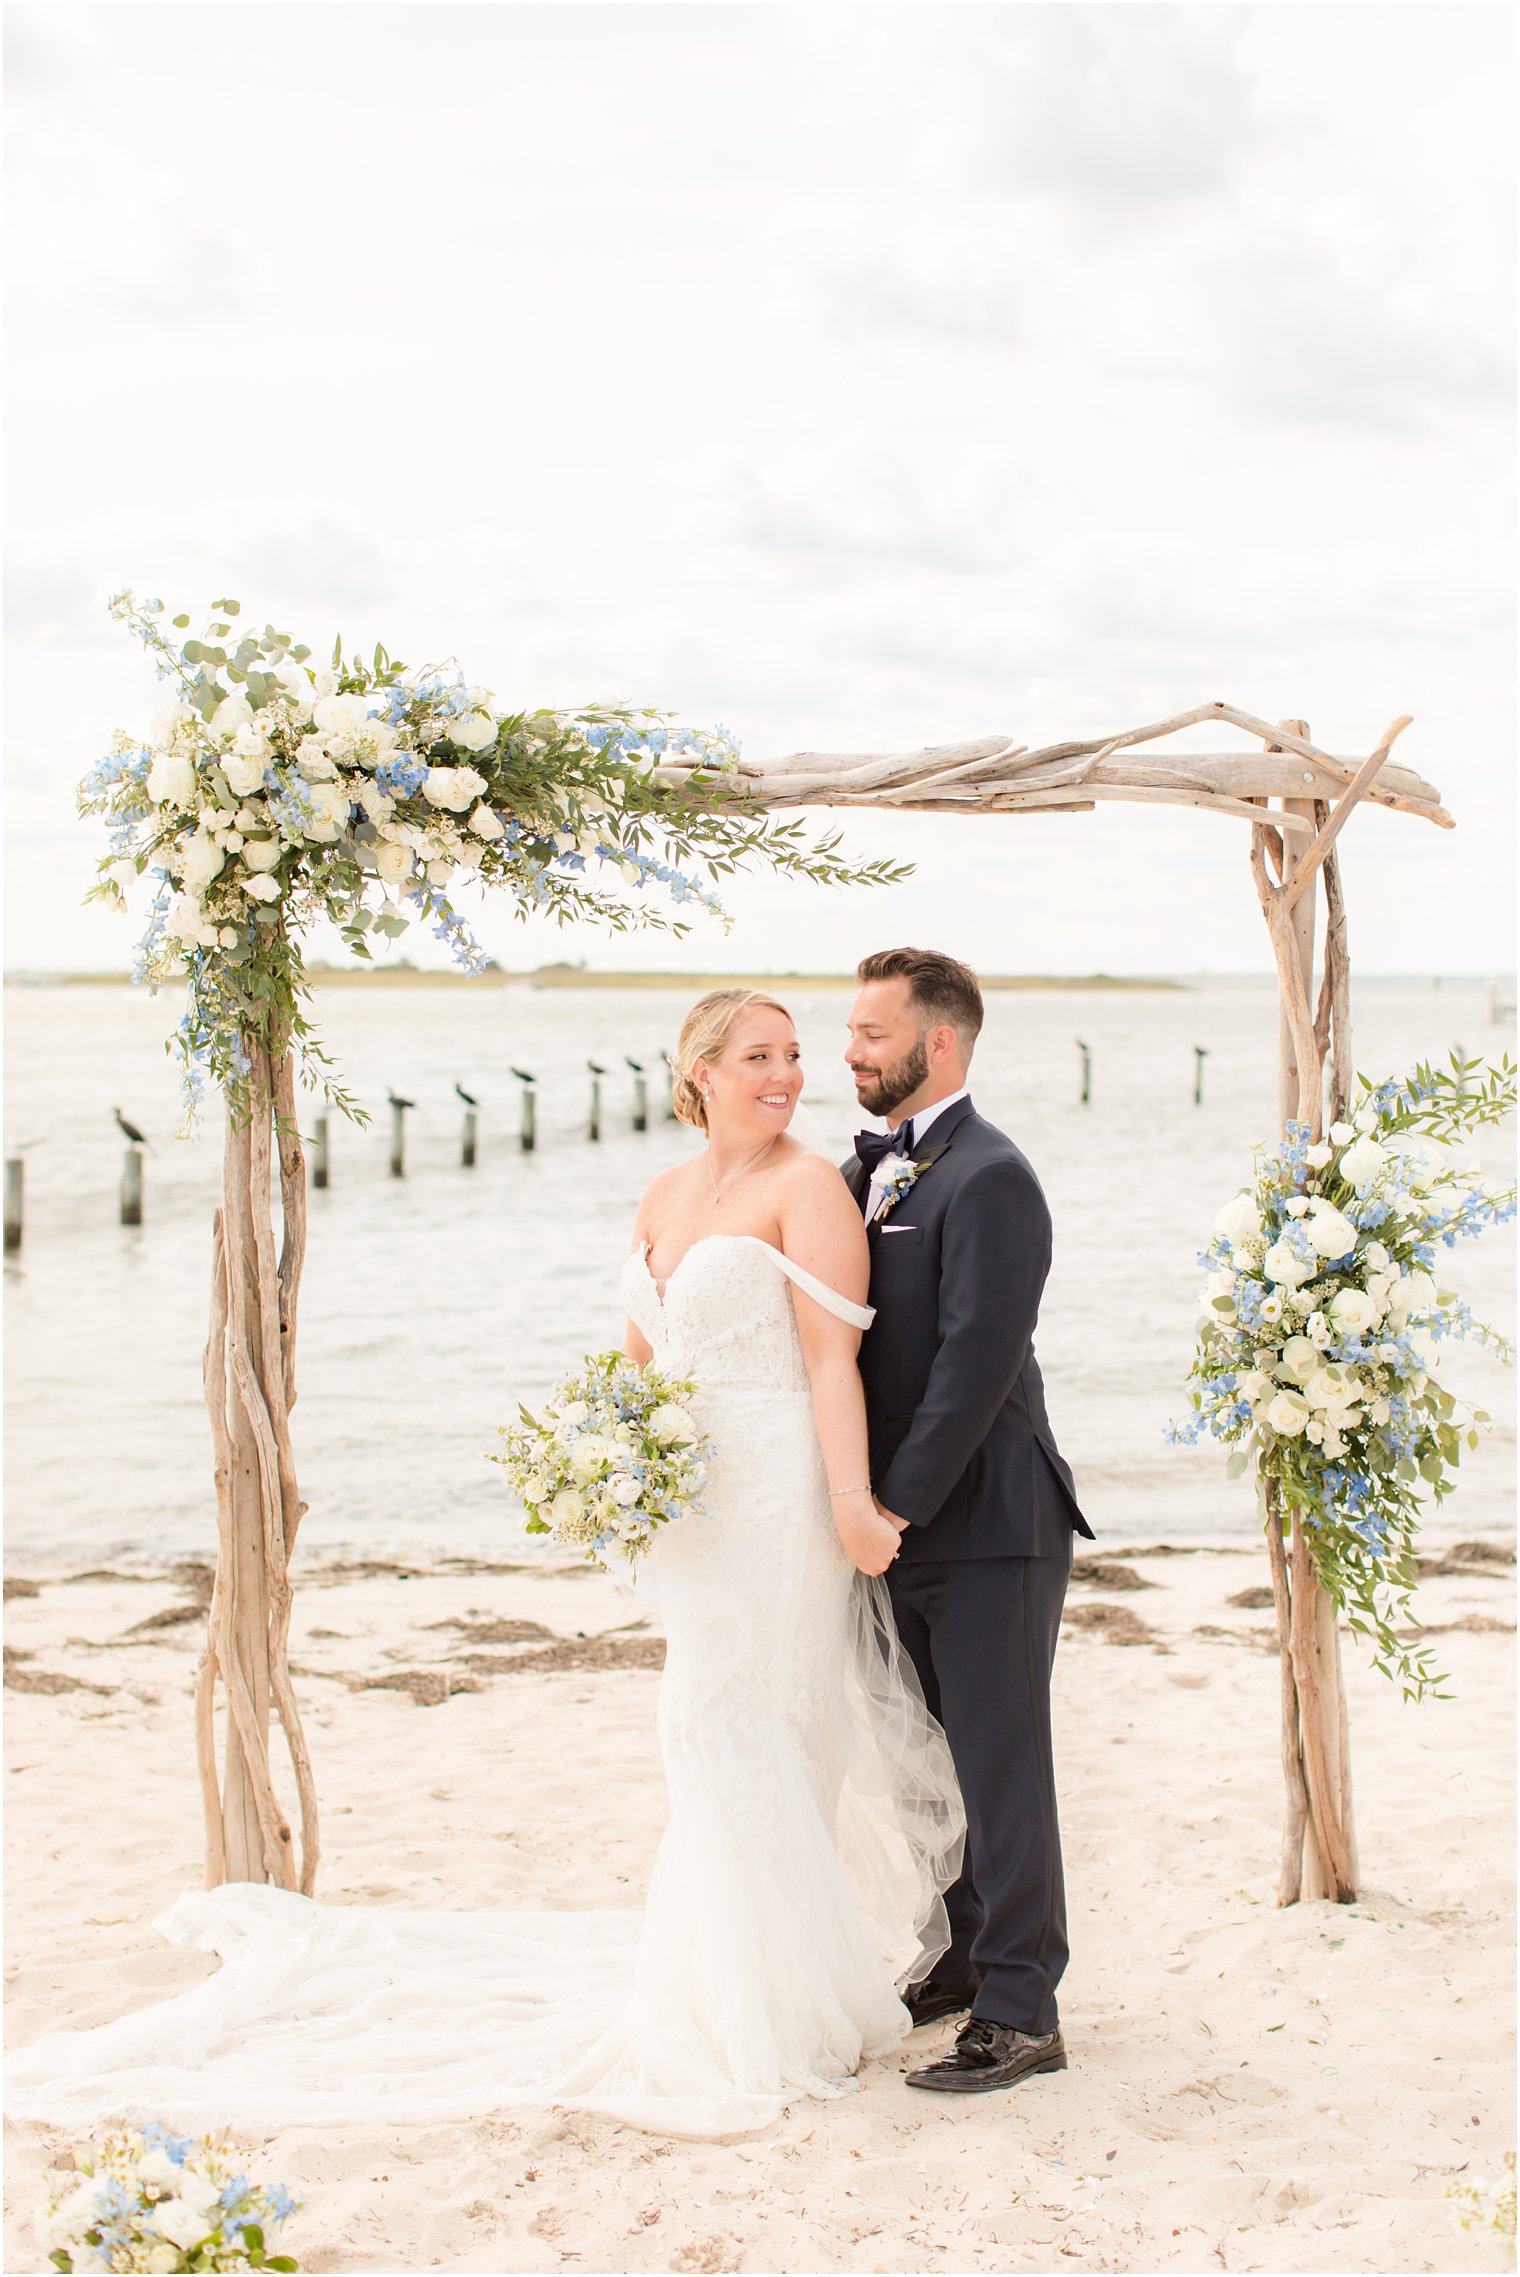 bride in off-the-shoulder gown poses with groom under wooden arbor with floral accents